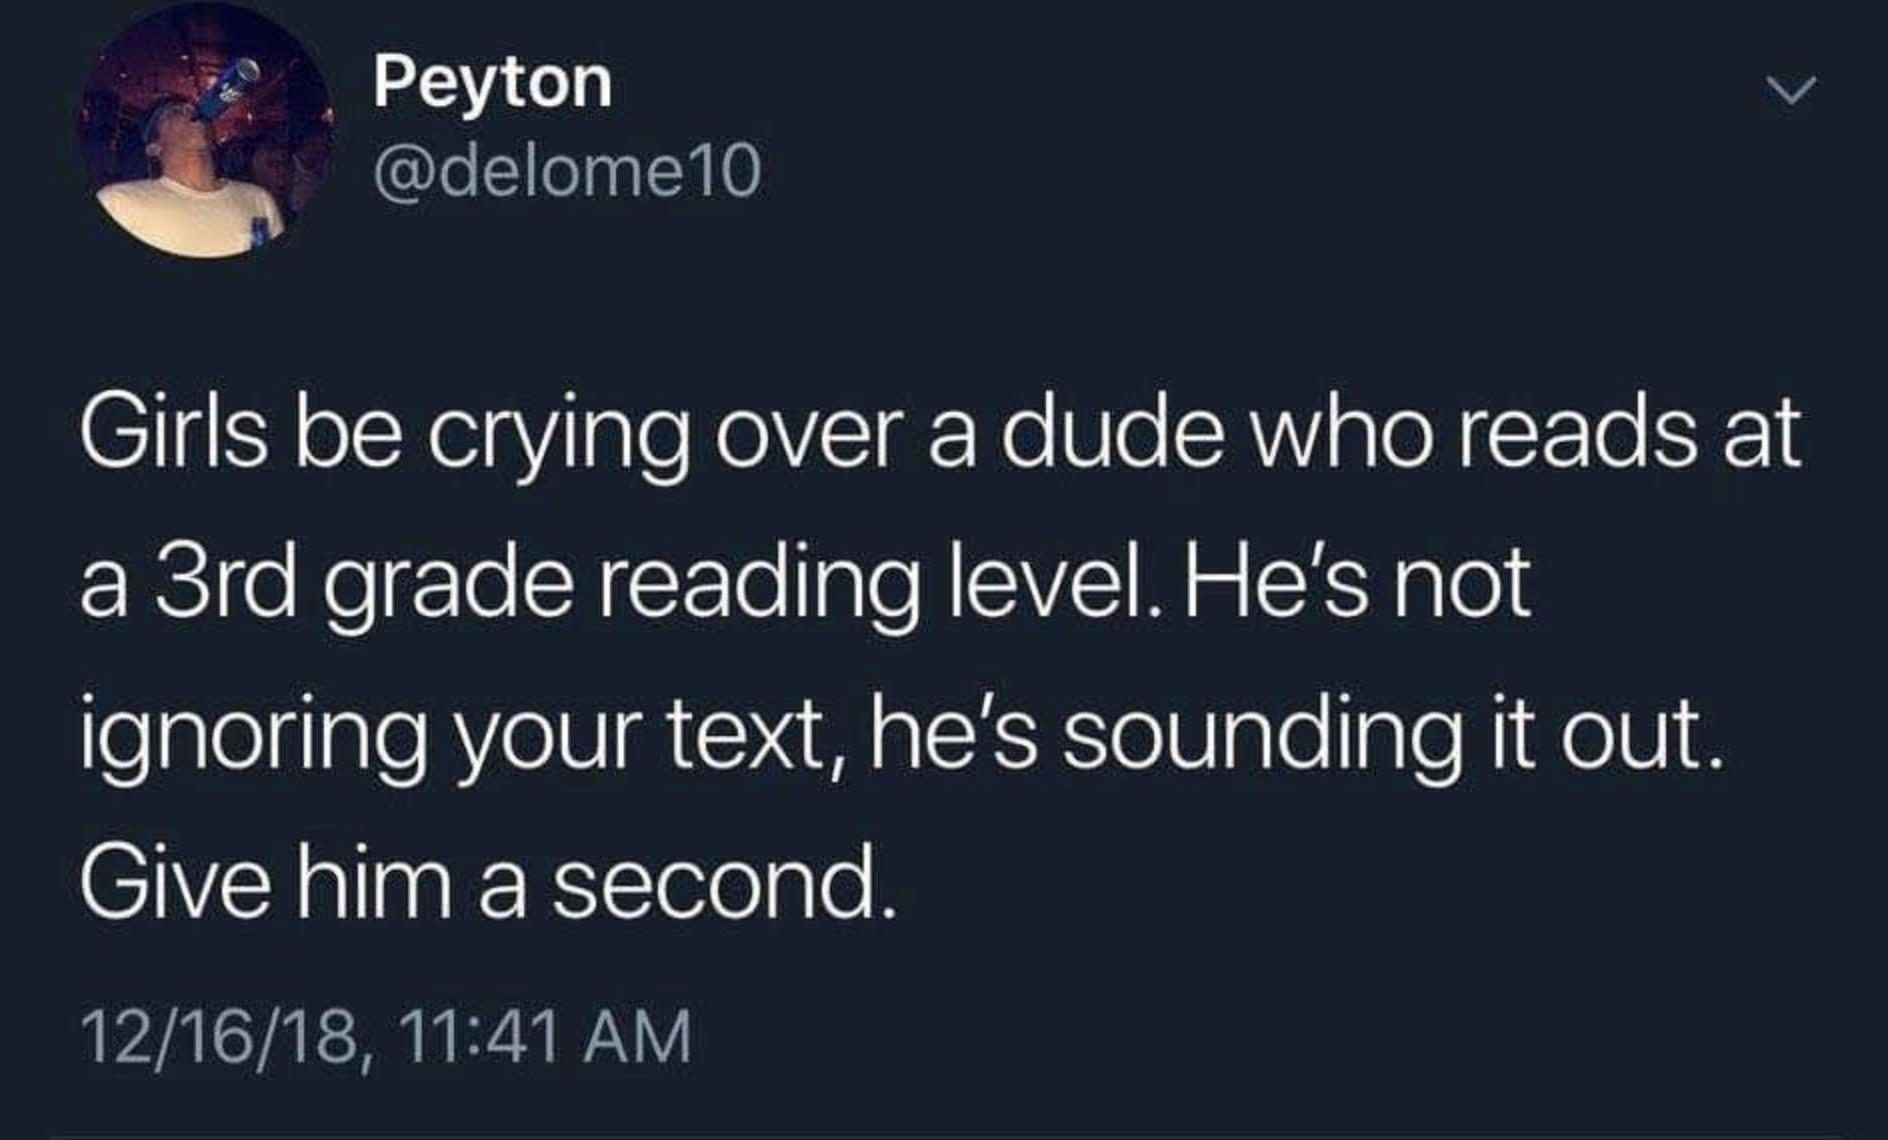 long john silvers meme - Peyton 10 Girls be crying over a dude who reads at a 3rd grade reading level. He's not ignoring your text, he's sounding it out. Give him a second. 121618,